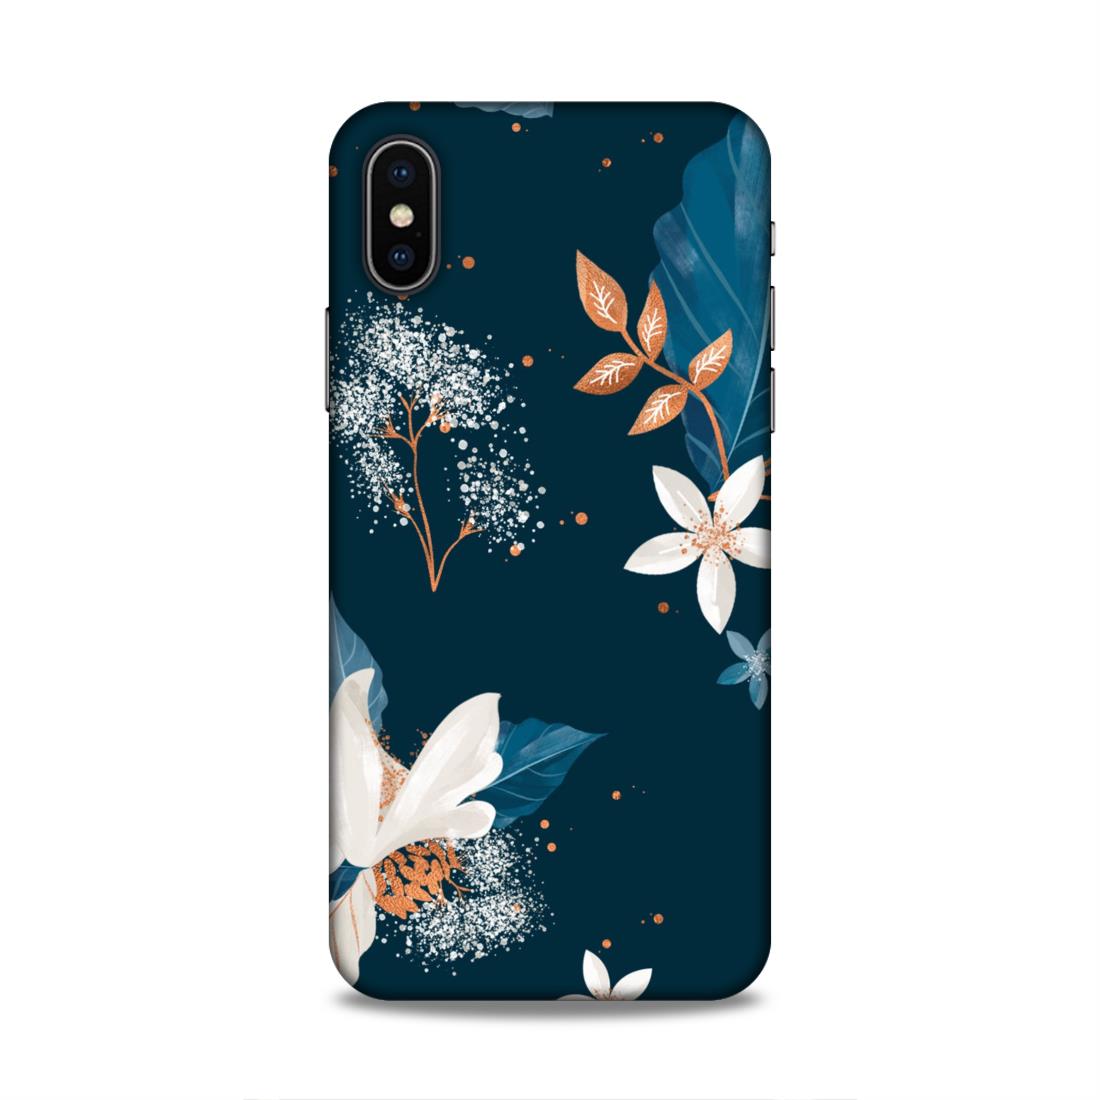 Blue Floral Hard Back Case For Apple iPhone X/XS